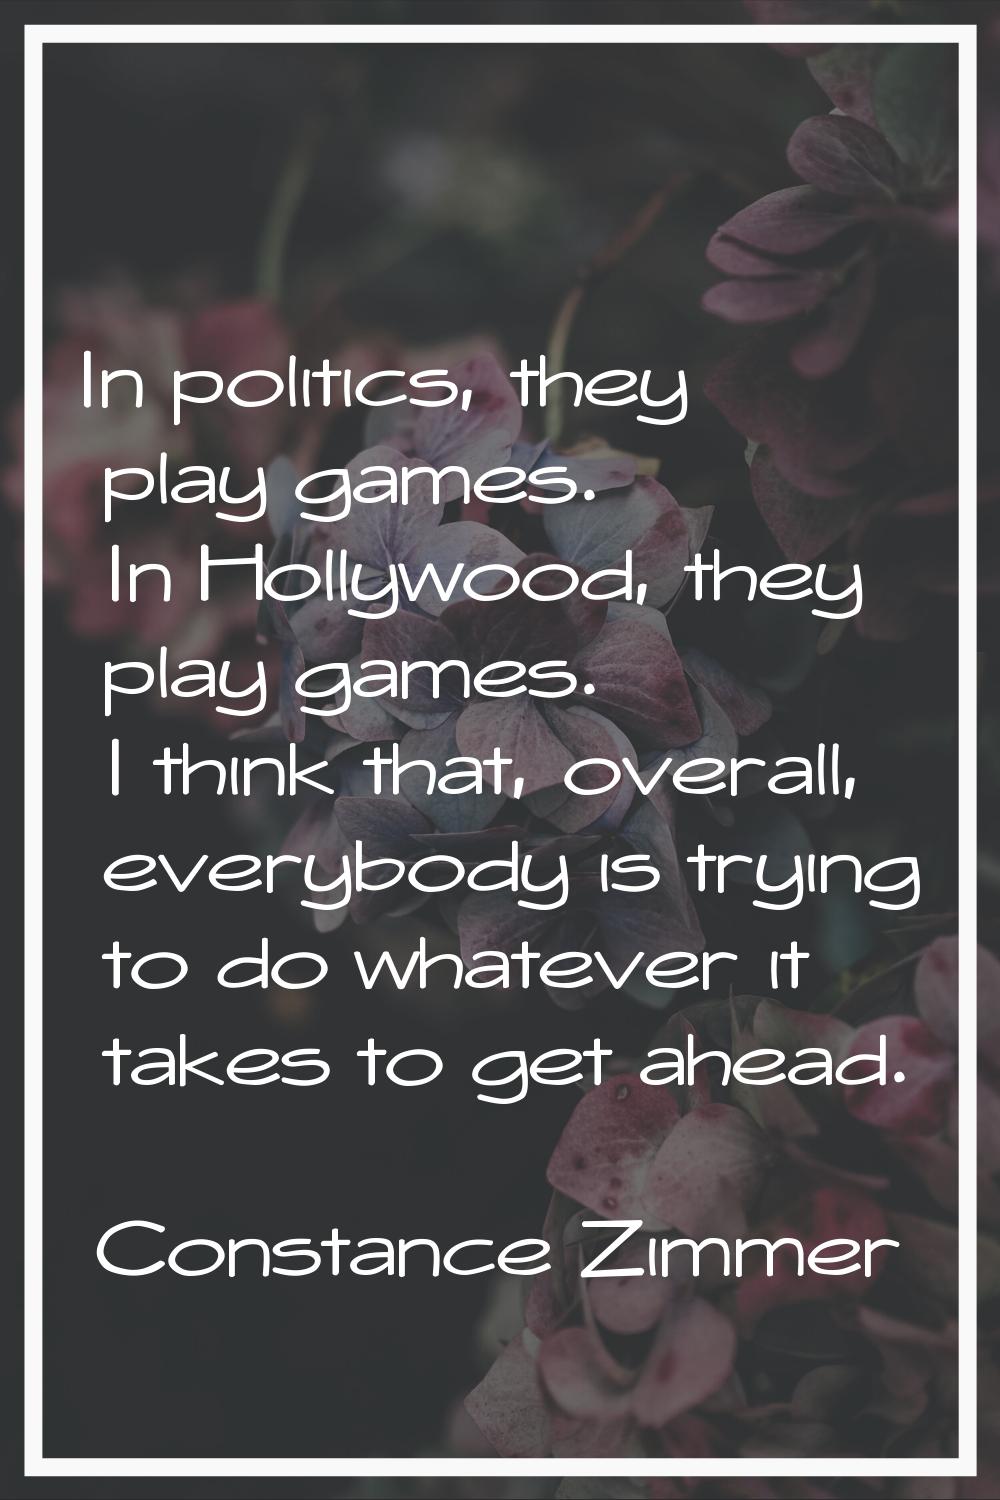 In politics, they play games. In Hollywood, they play games. I think that, overall, everybody is tr